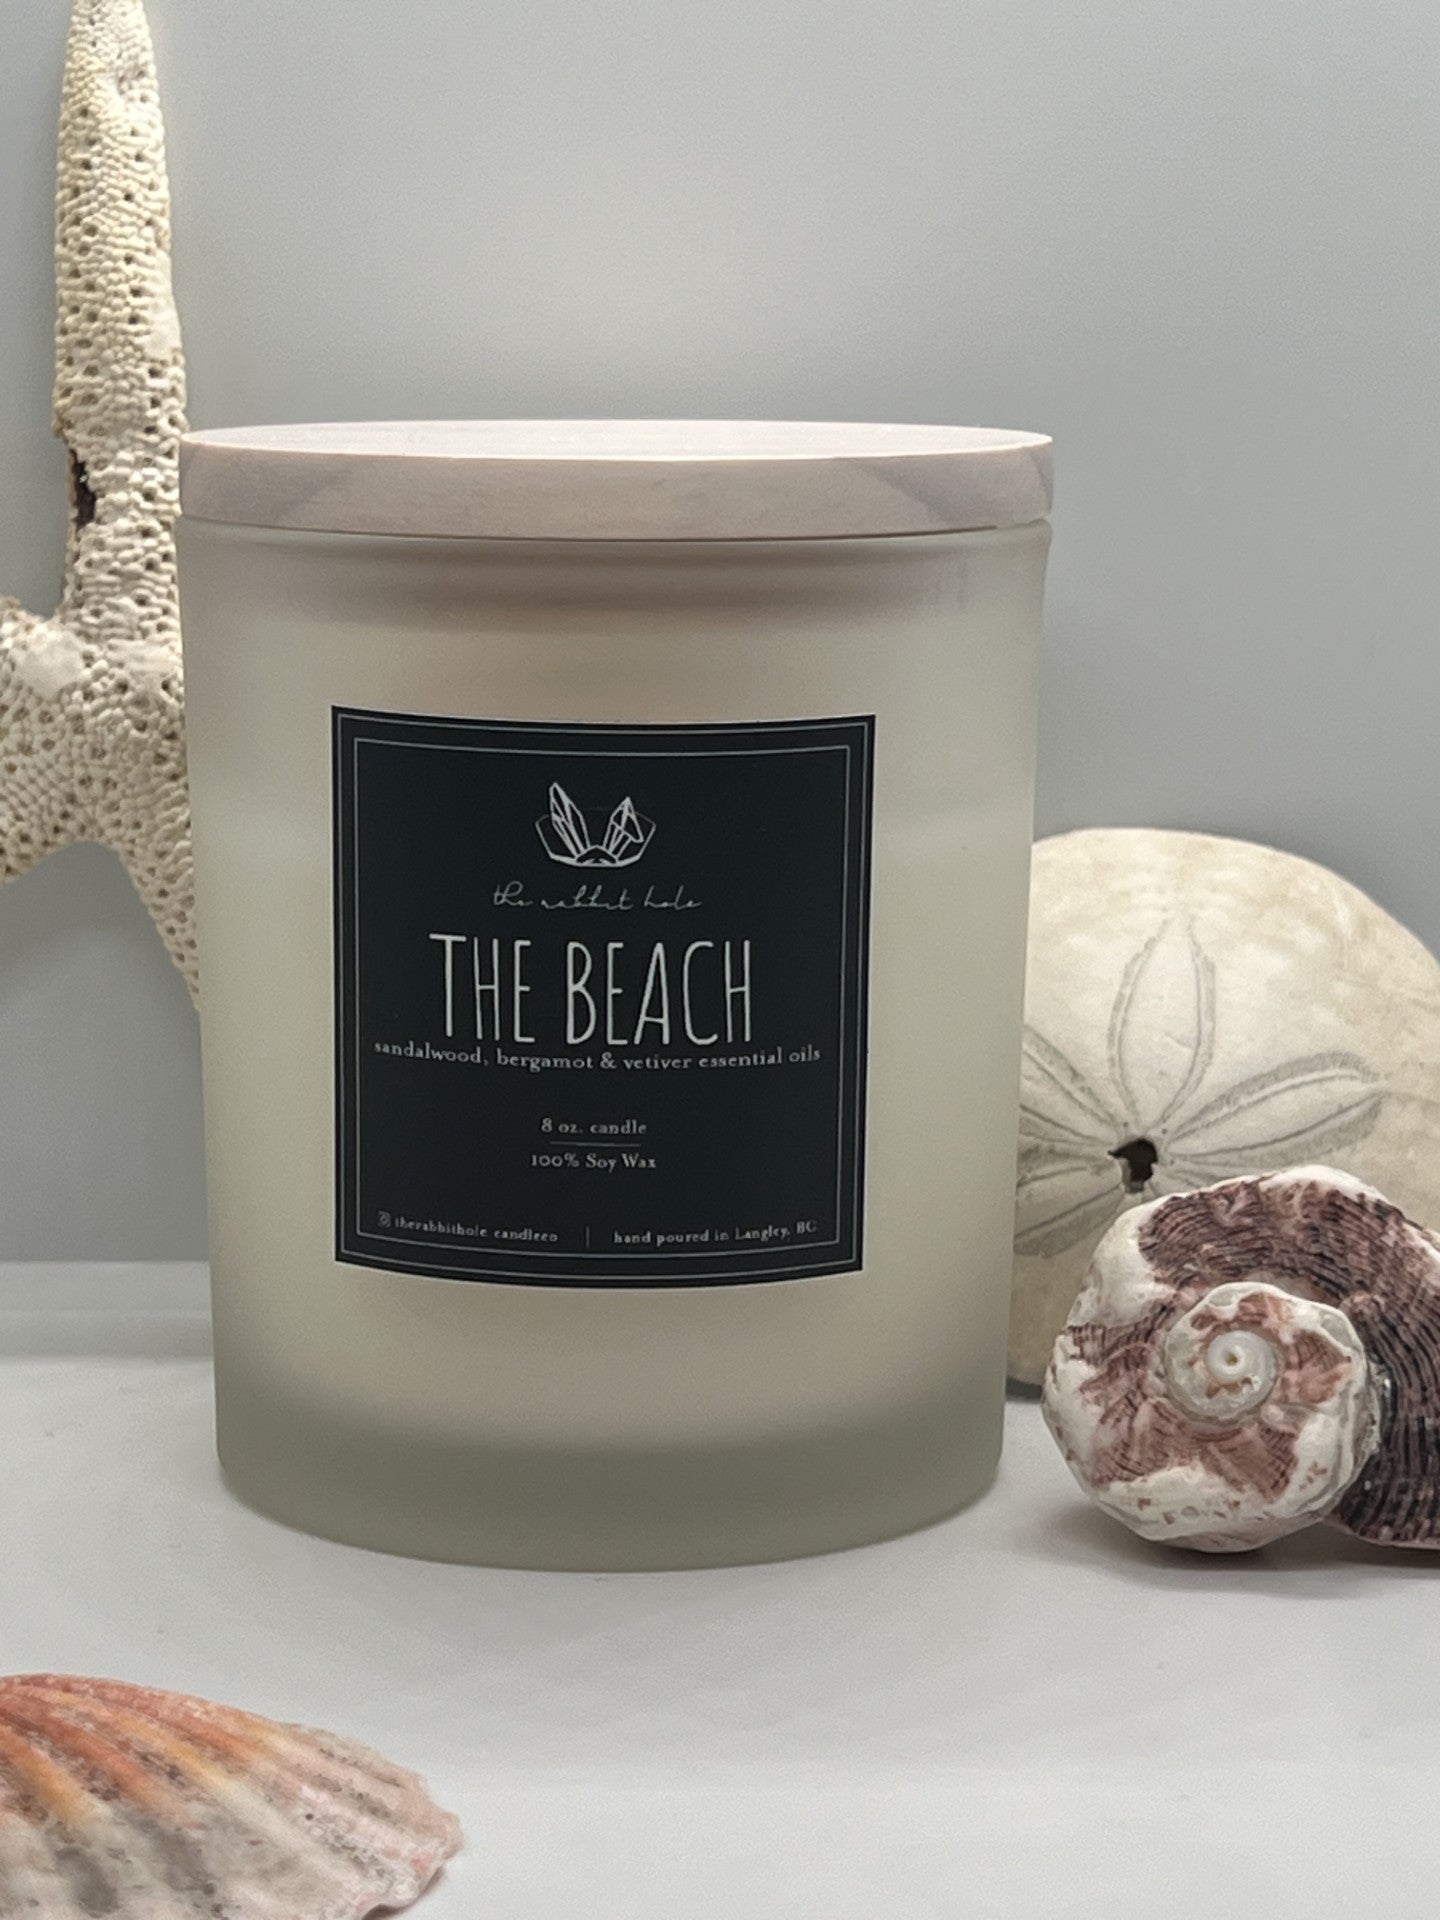 The Beach | 8 oz. Soy Wax Natural Oil Lux Vessel